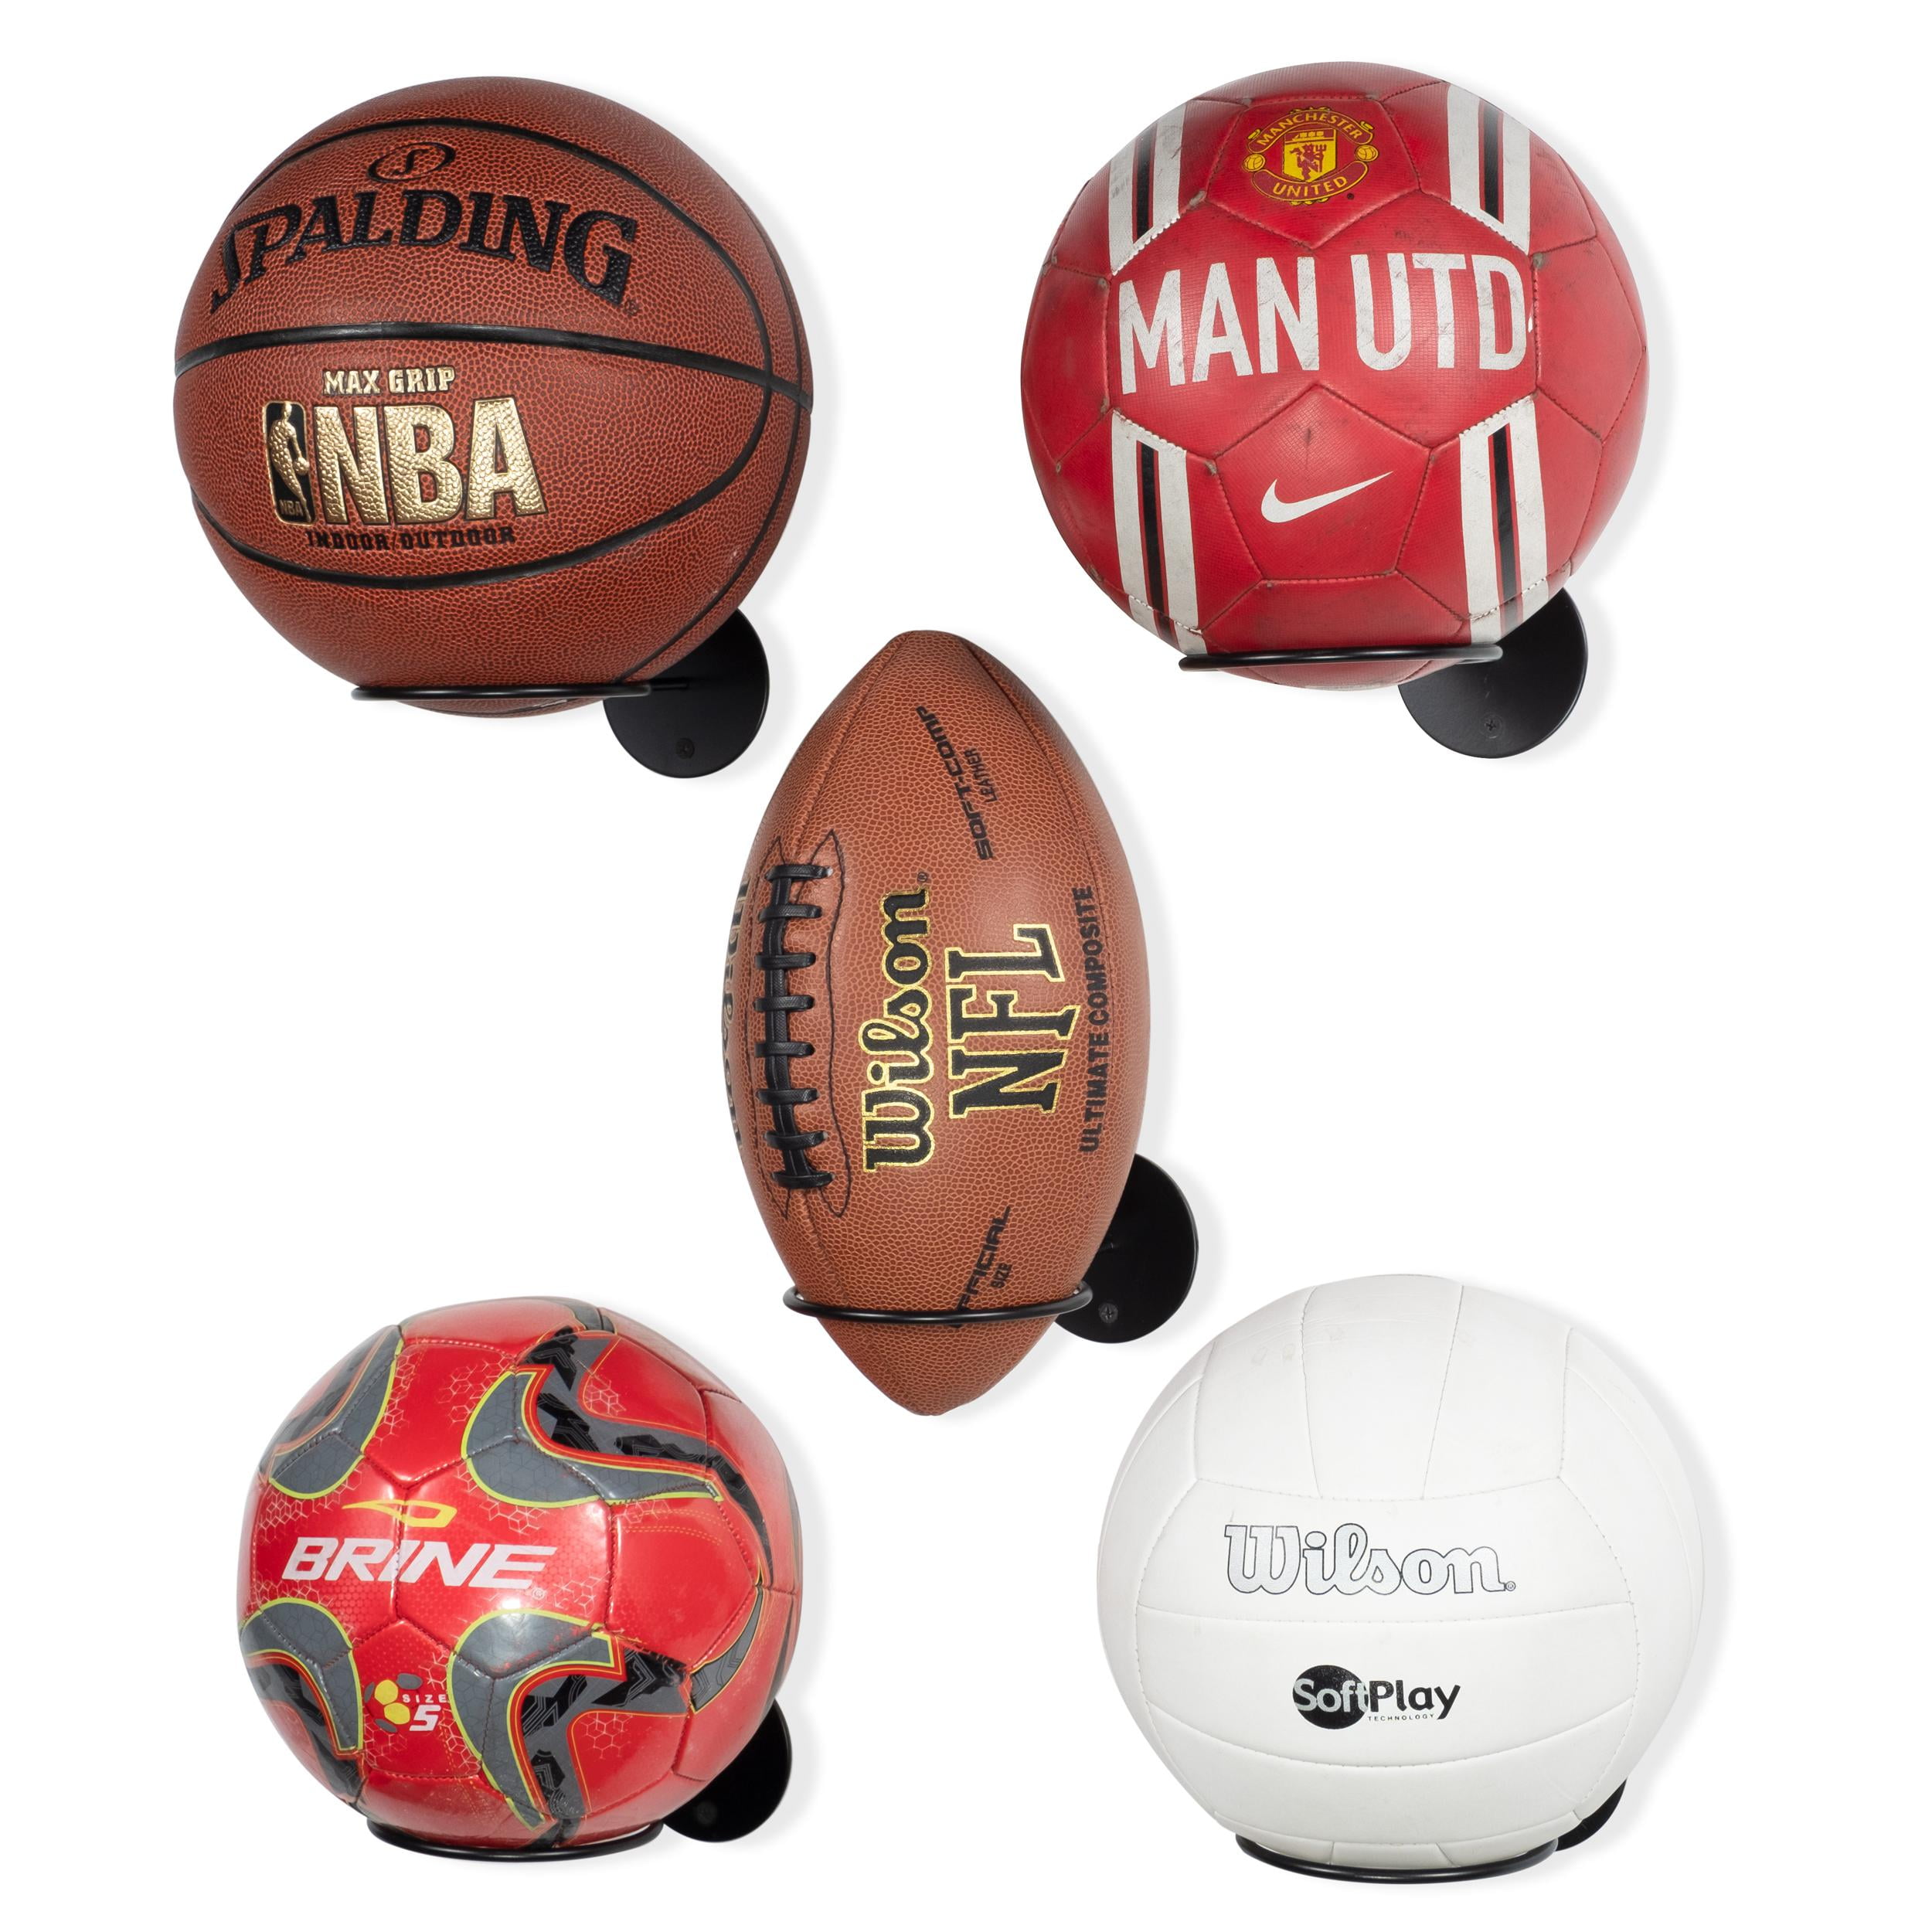 Display Rack for Basketball Rugby hodzumrac Wall Mounted Ball Holder Gold Sports Ball Storage Rack Ball Holder Soccer Volleyball